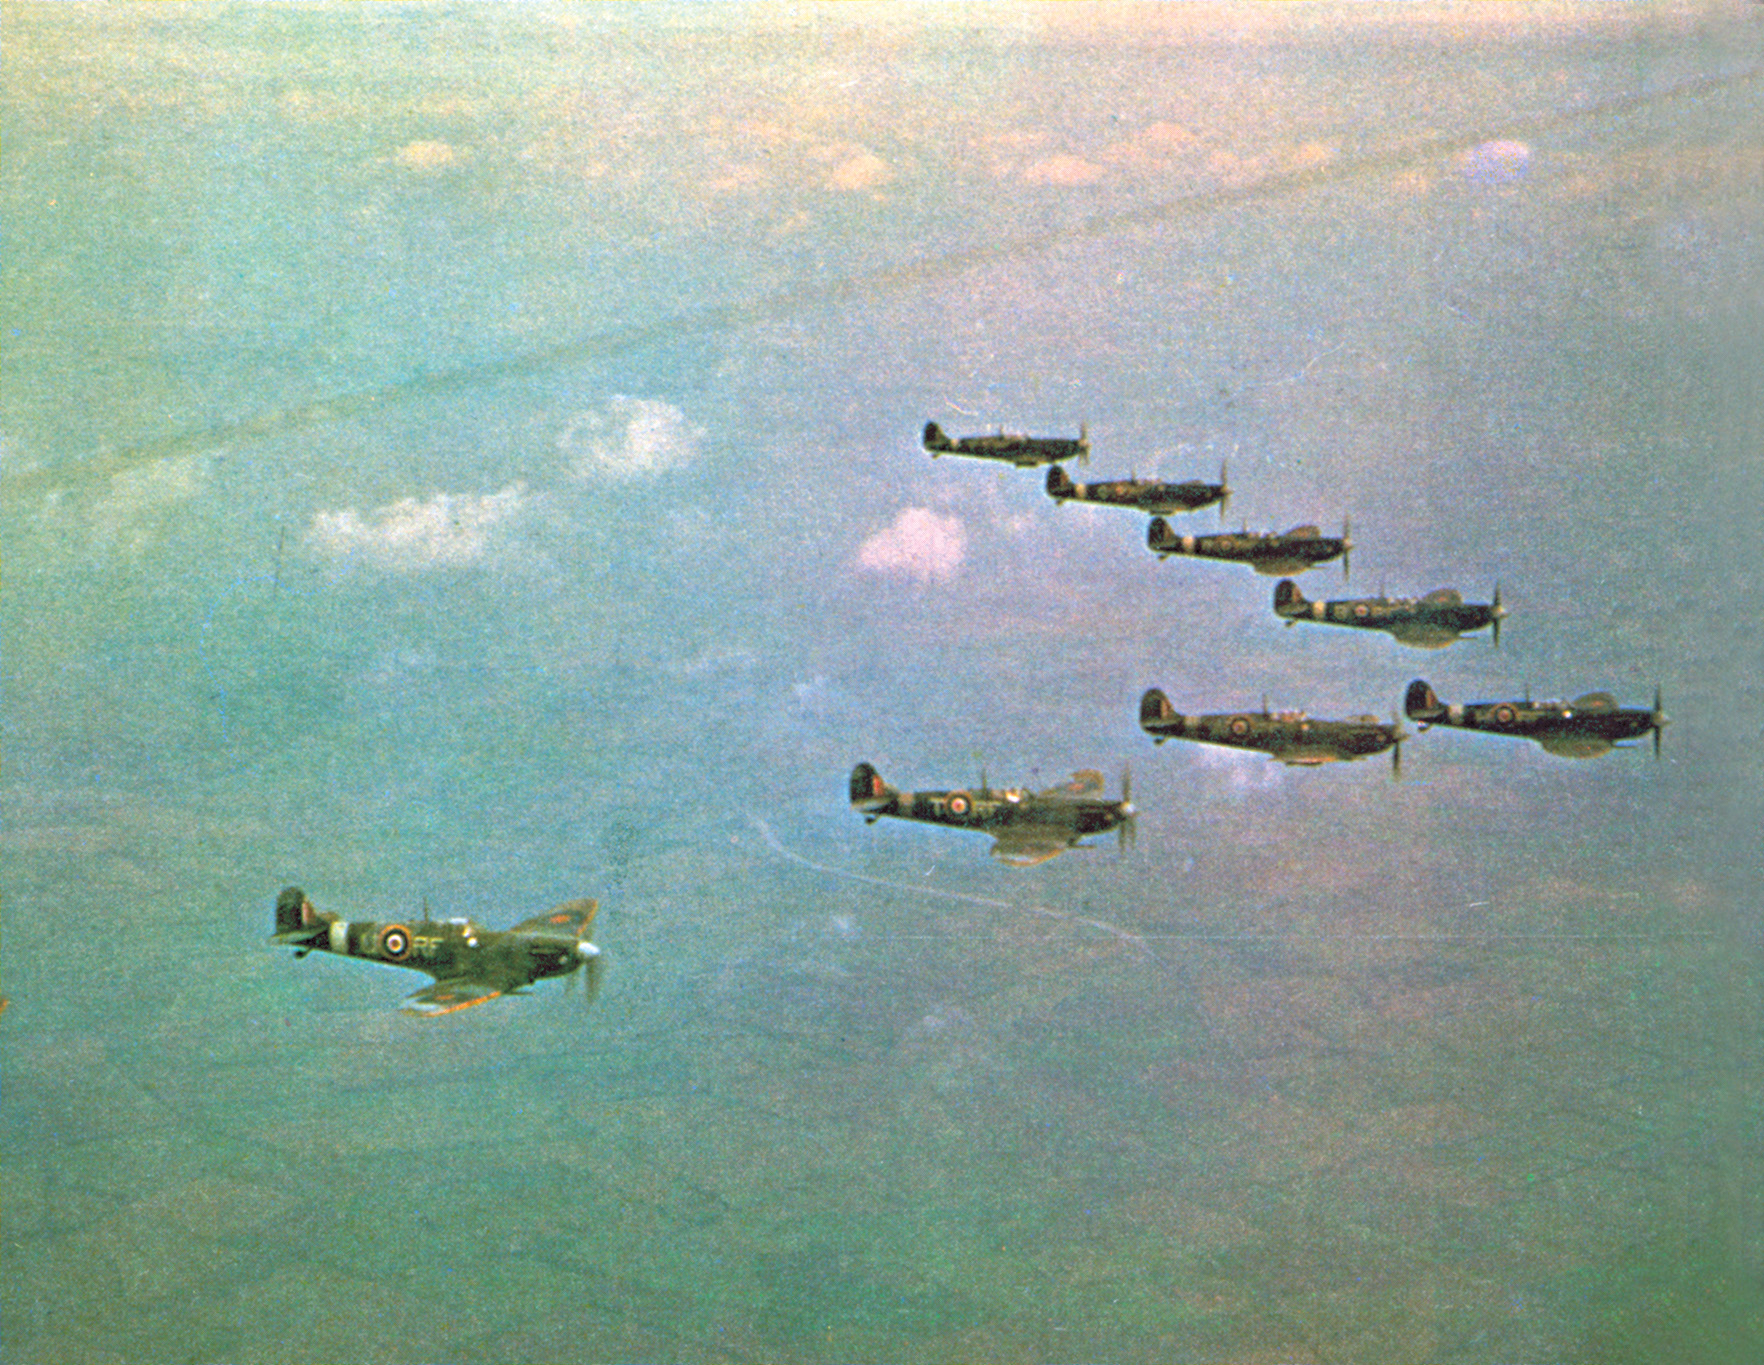 The 303 Squadron of the RAF was flown by Polish pilots.